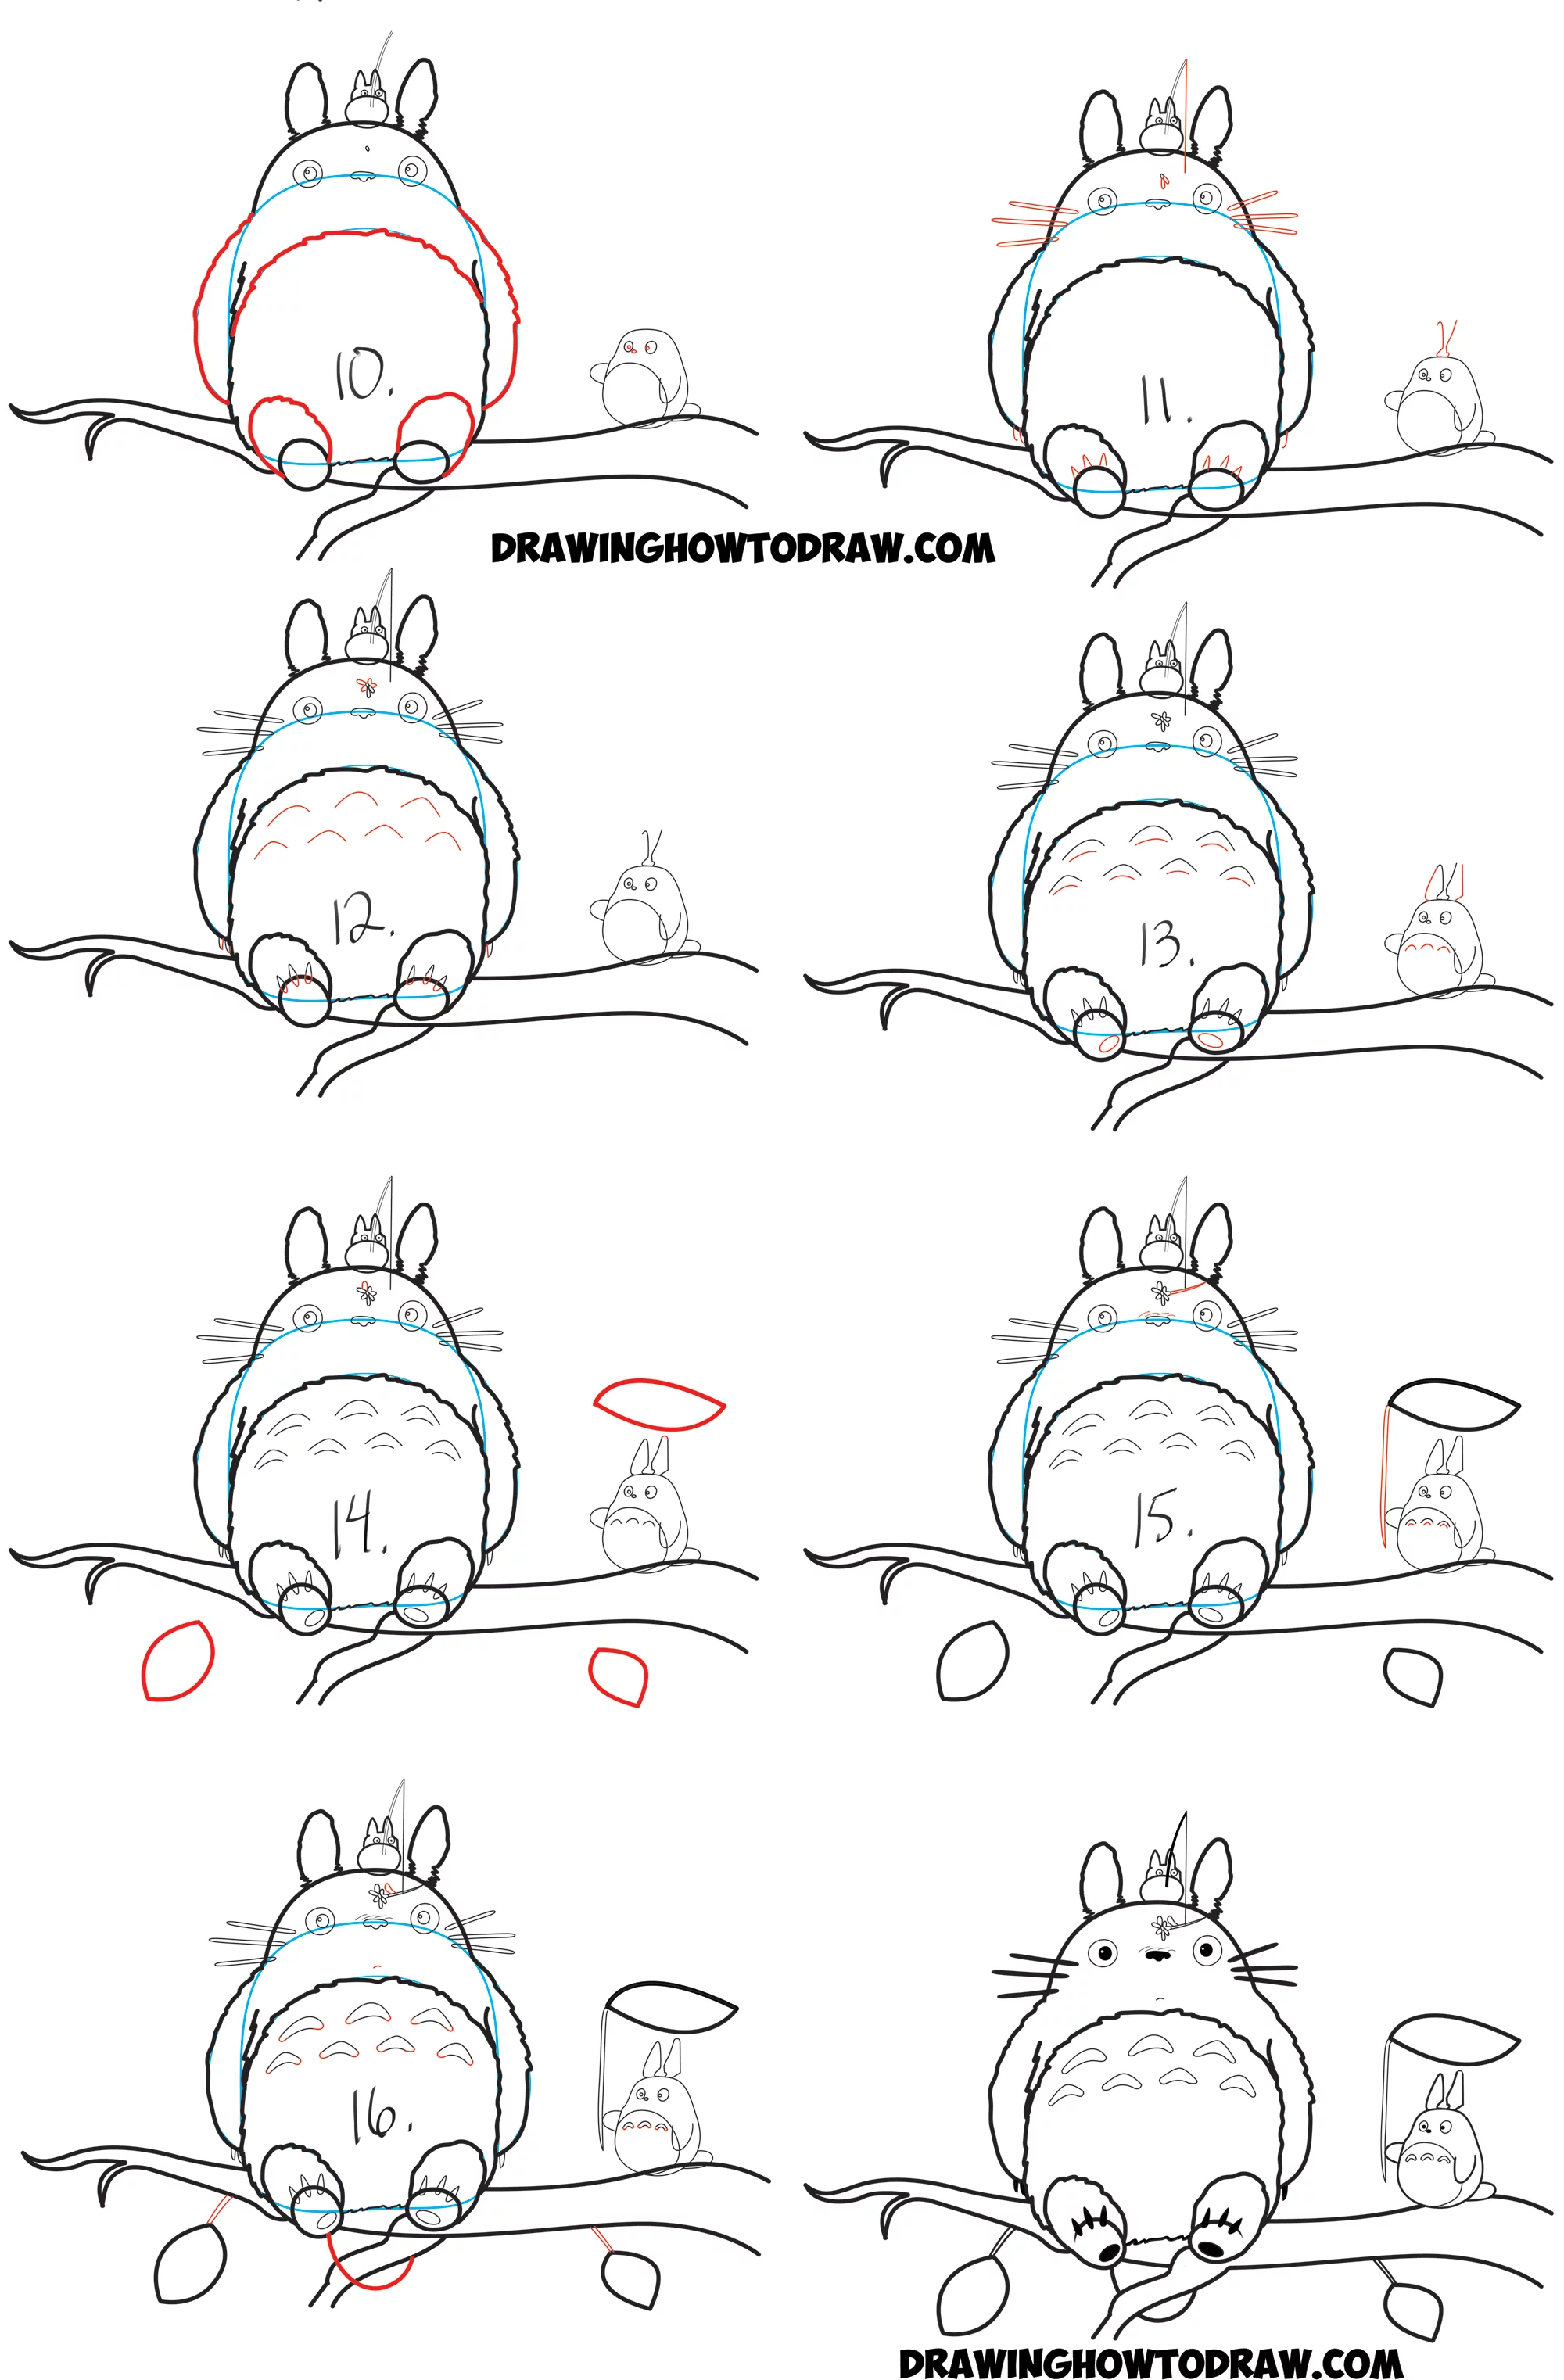 How To Draw Totoro From My Neighbor Totoro Easy Step By Step Drawing Tutorial How To Draw Step By Step Drawing Tutorials